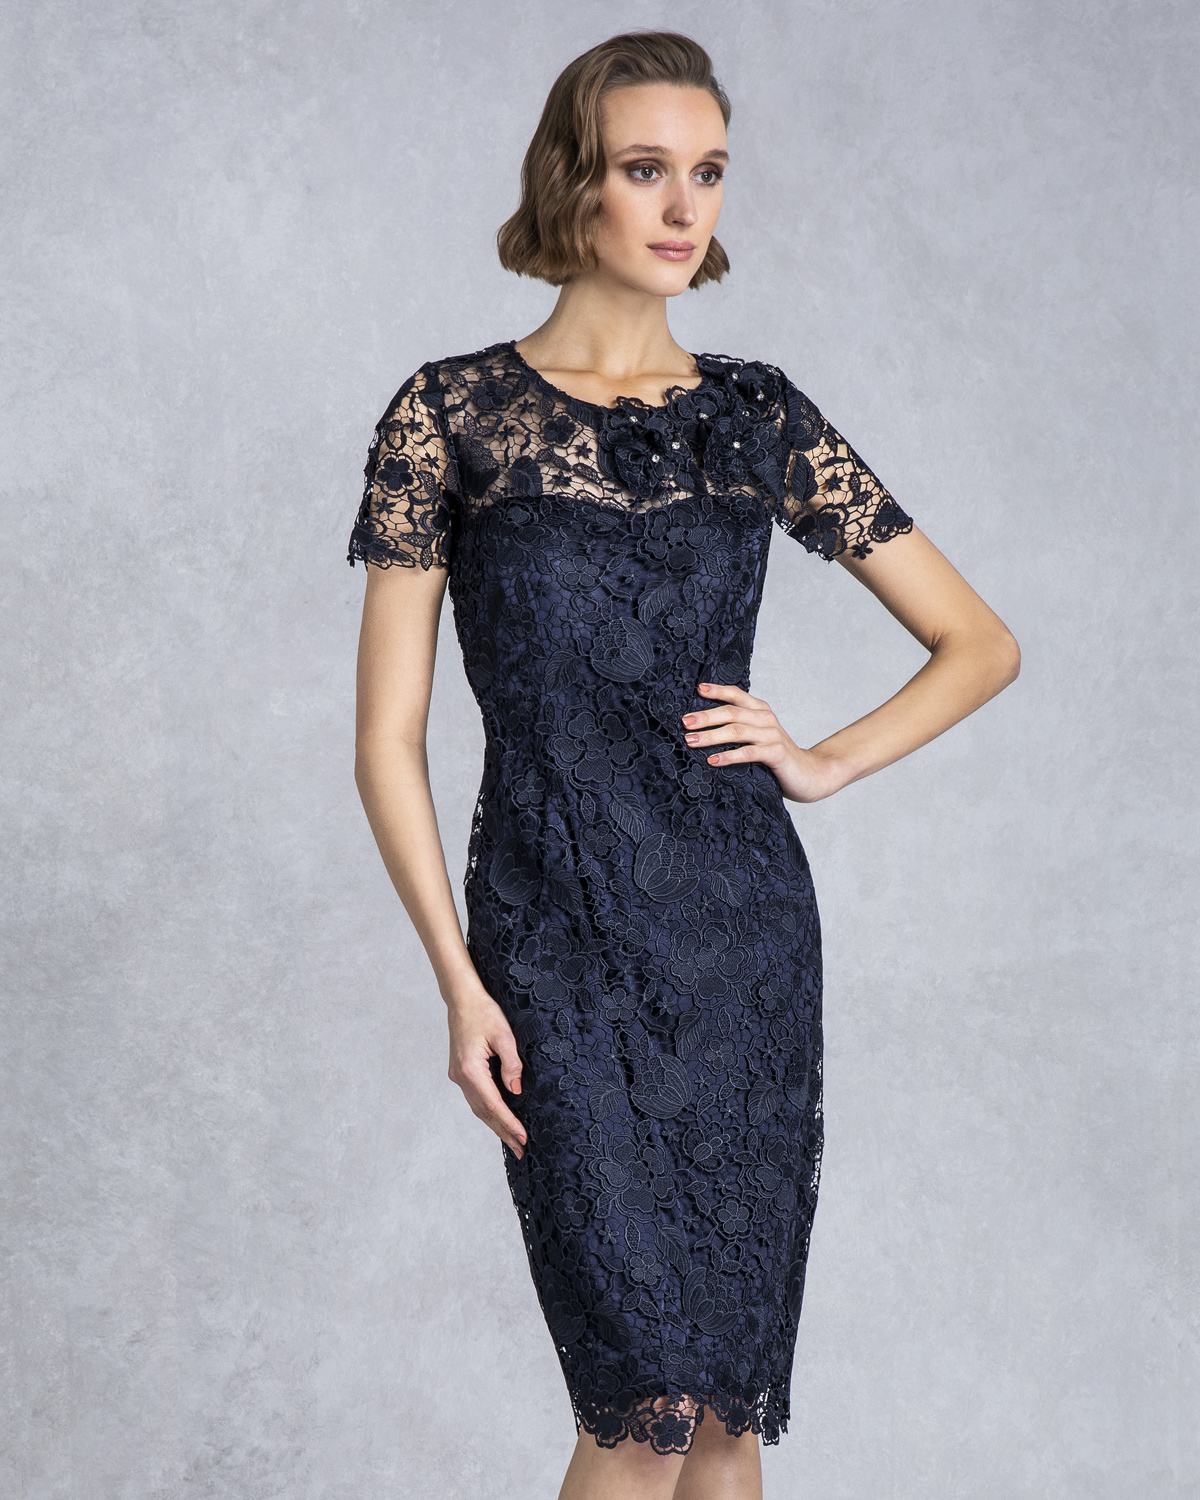 Классические платья / Mother of the bride short lace dress with sleeves